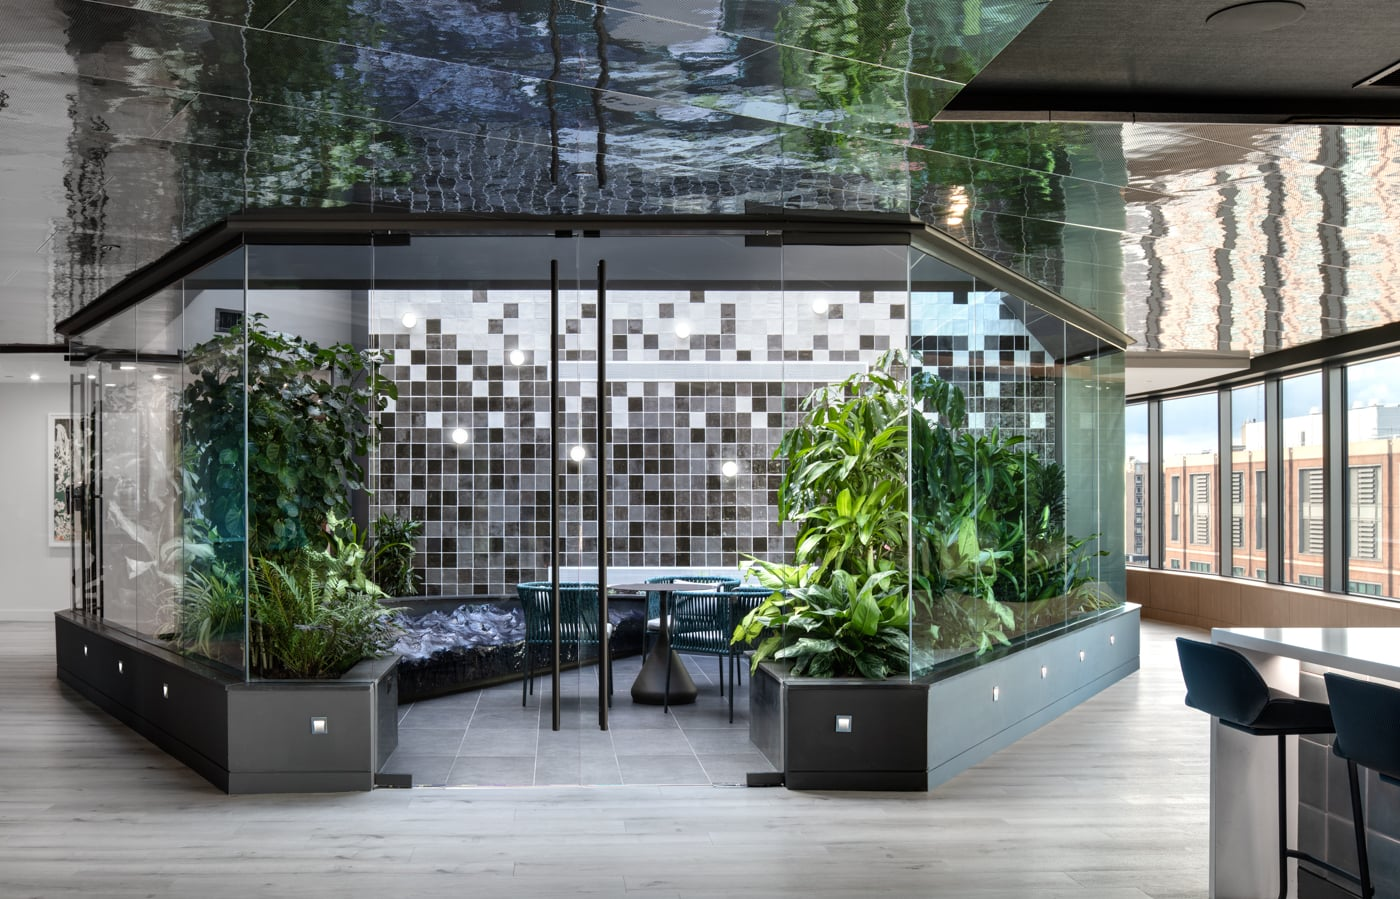 Frequently Asked Questions About Biophilic Design